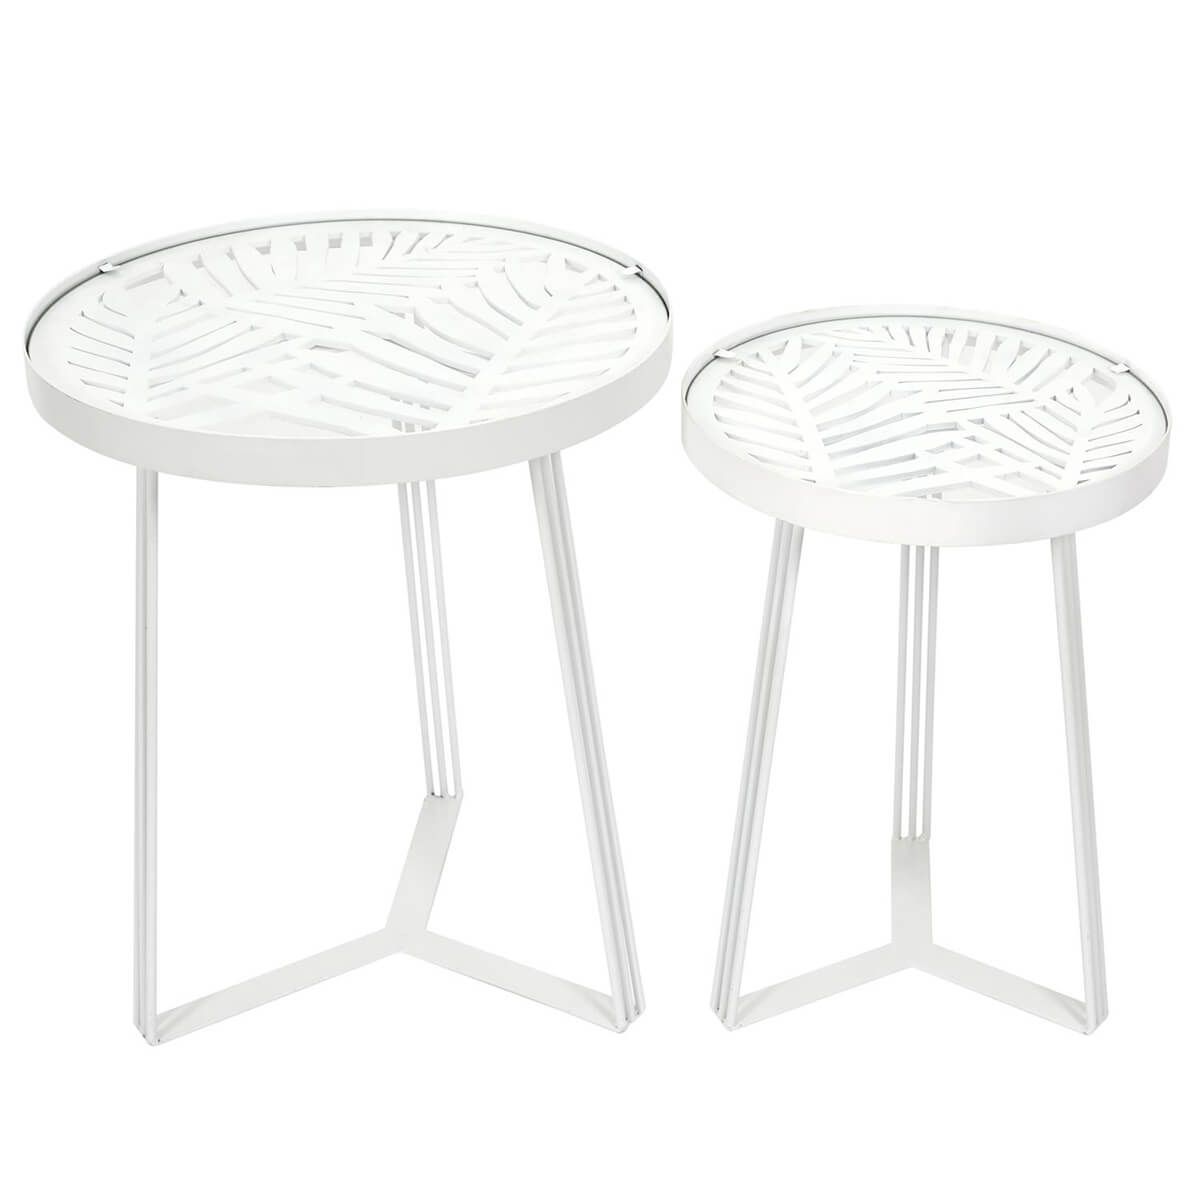 Sova - Tables Gigognes Blanches Motif Feuilles